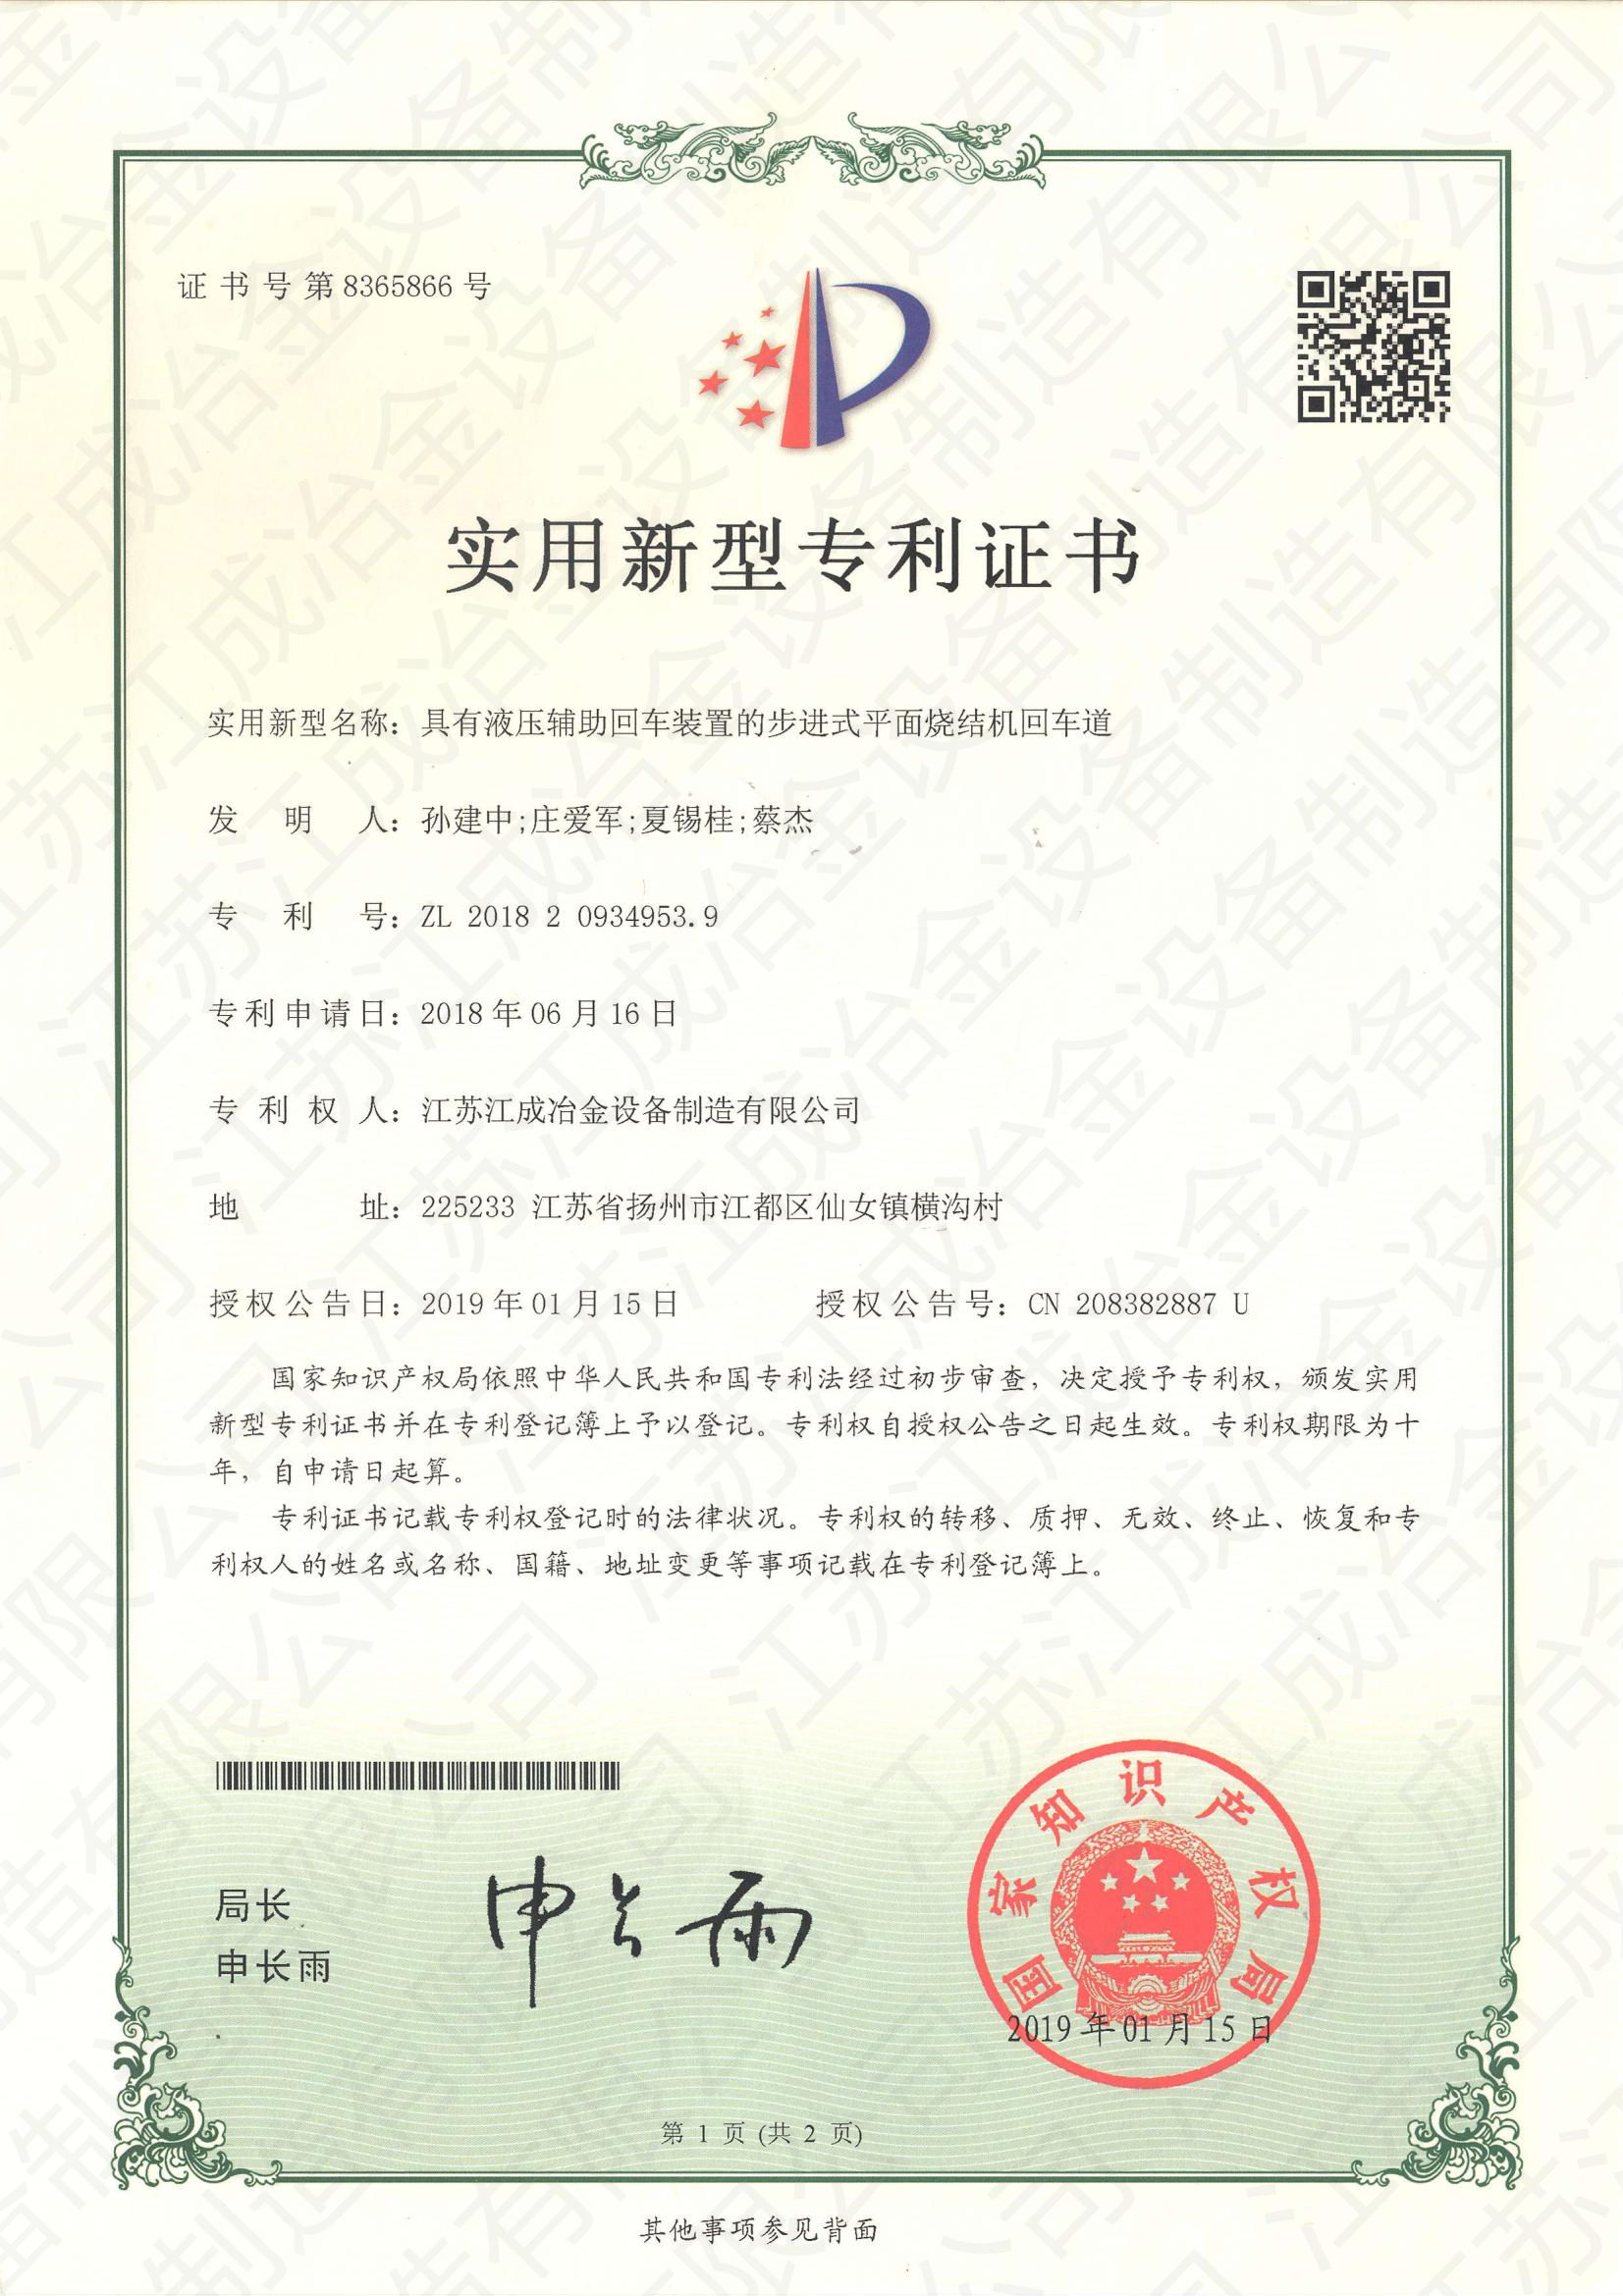 The patent certificate2019-4